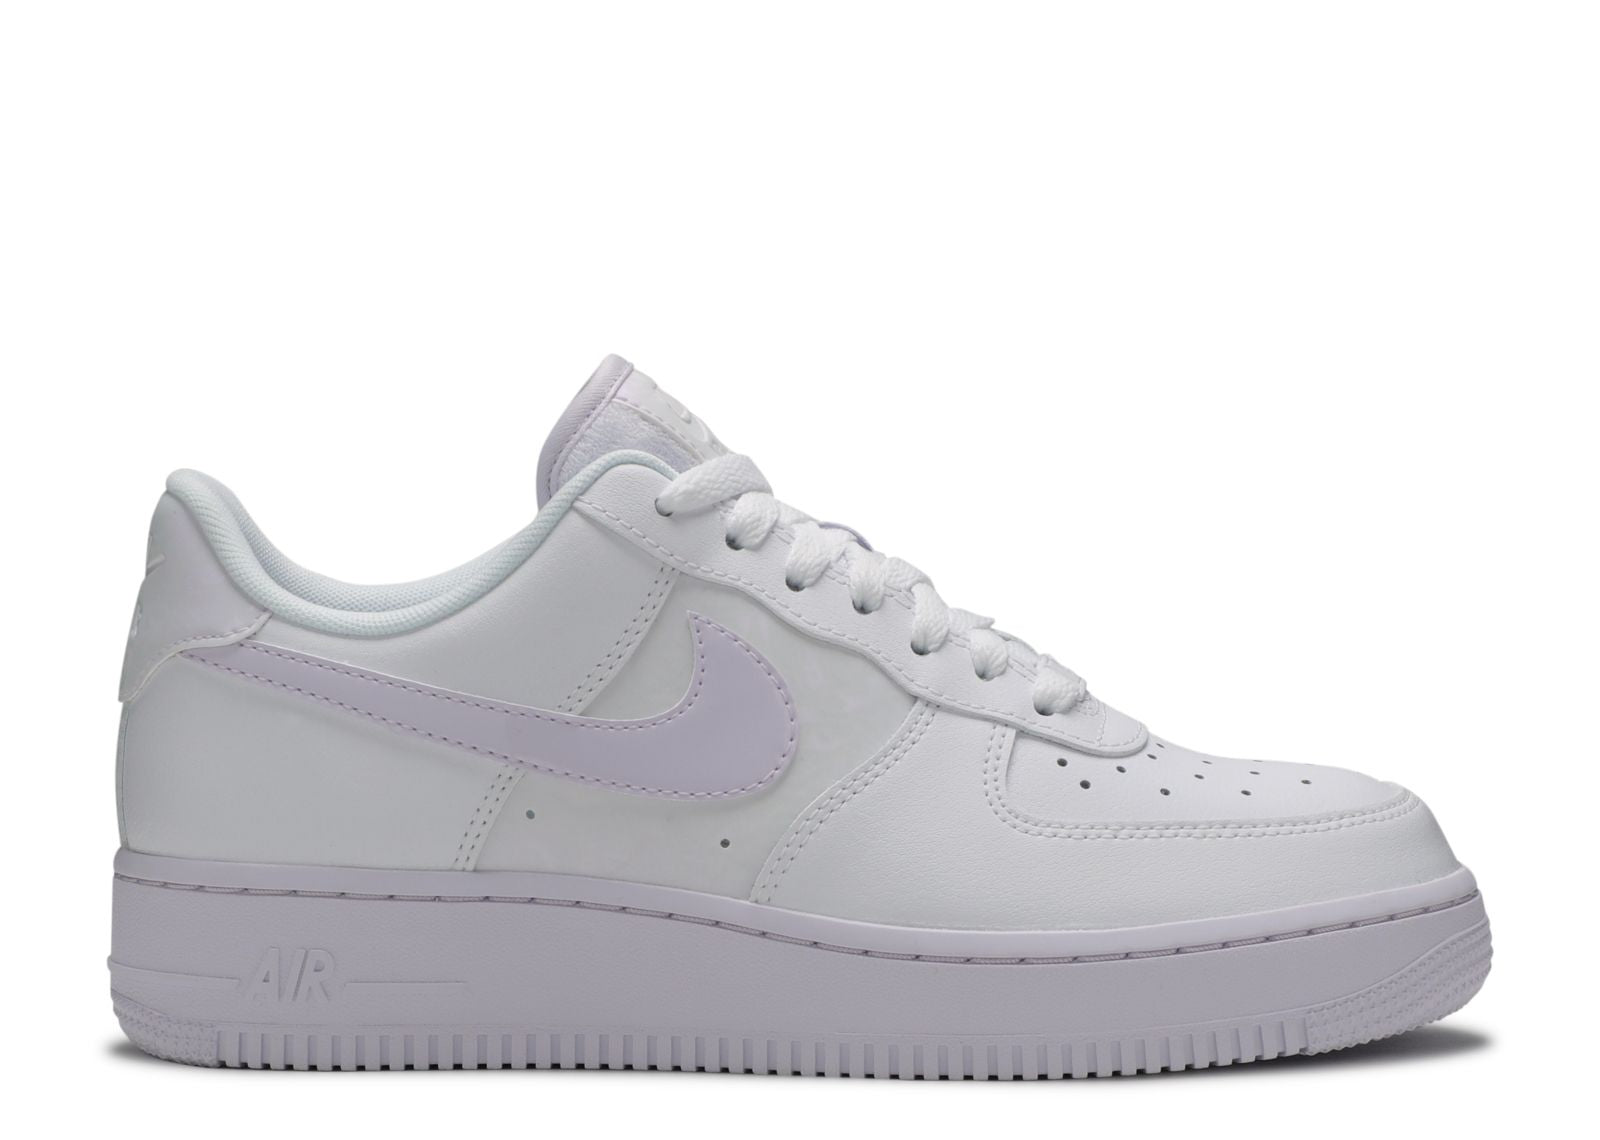 Second Chance - Nike Air bell 1 Low White Barely Grape (W) - 36 | NEW